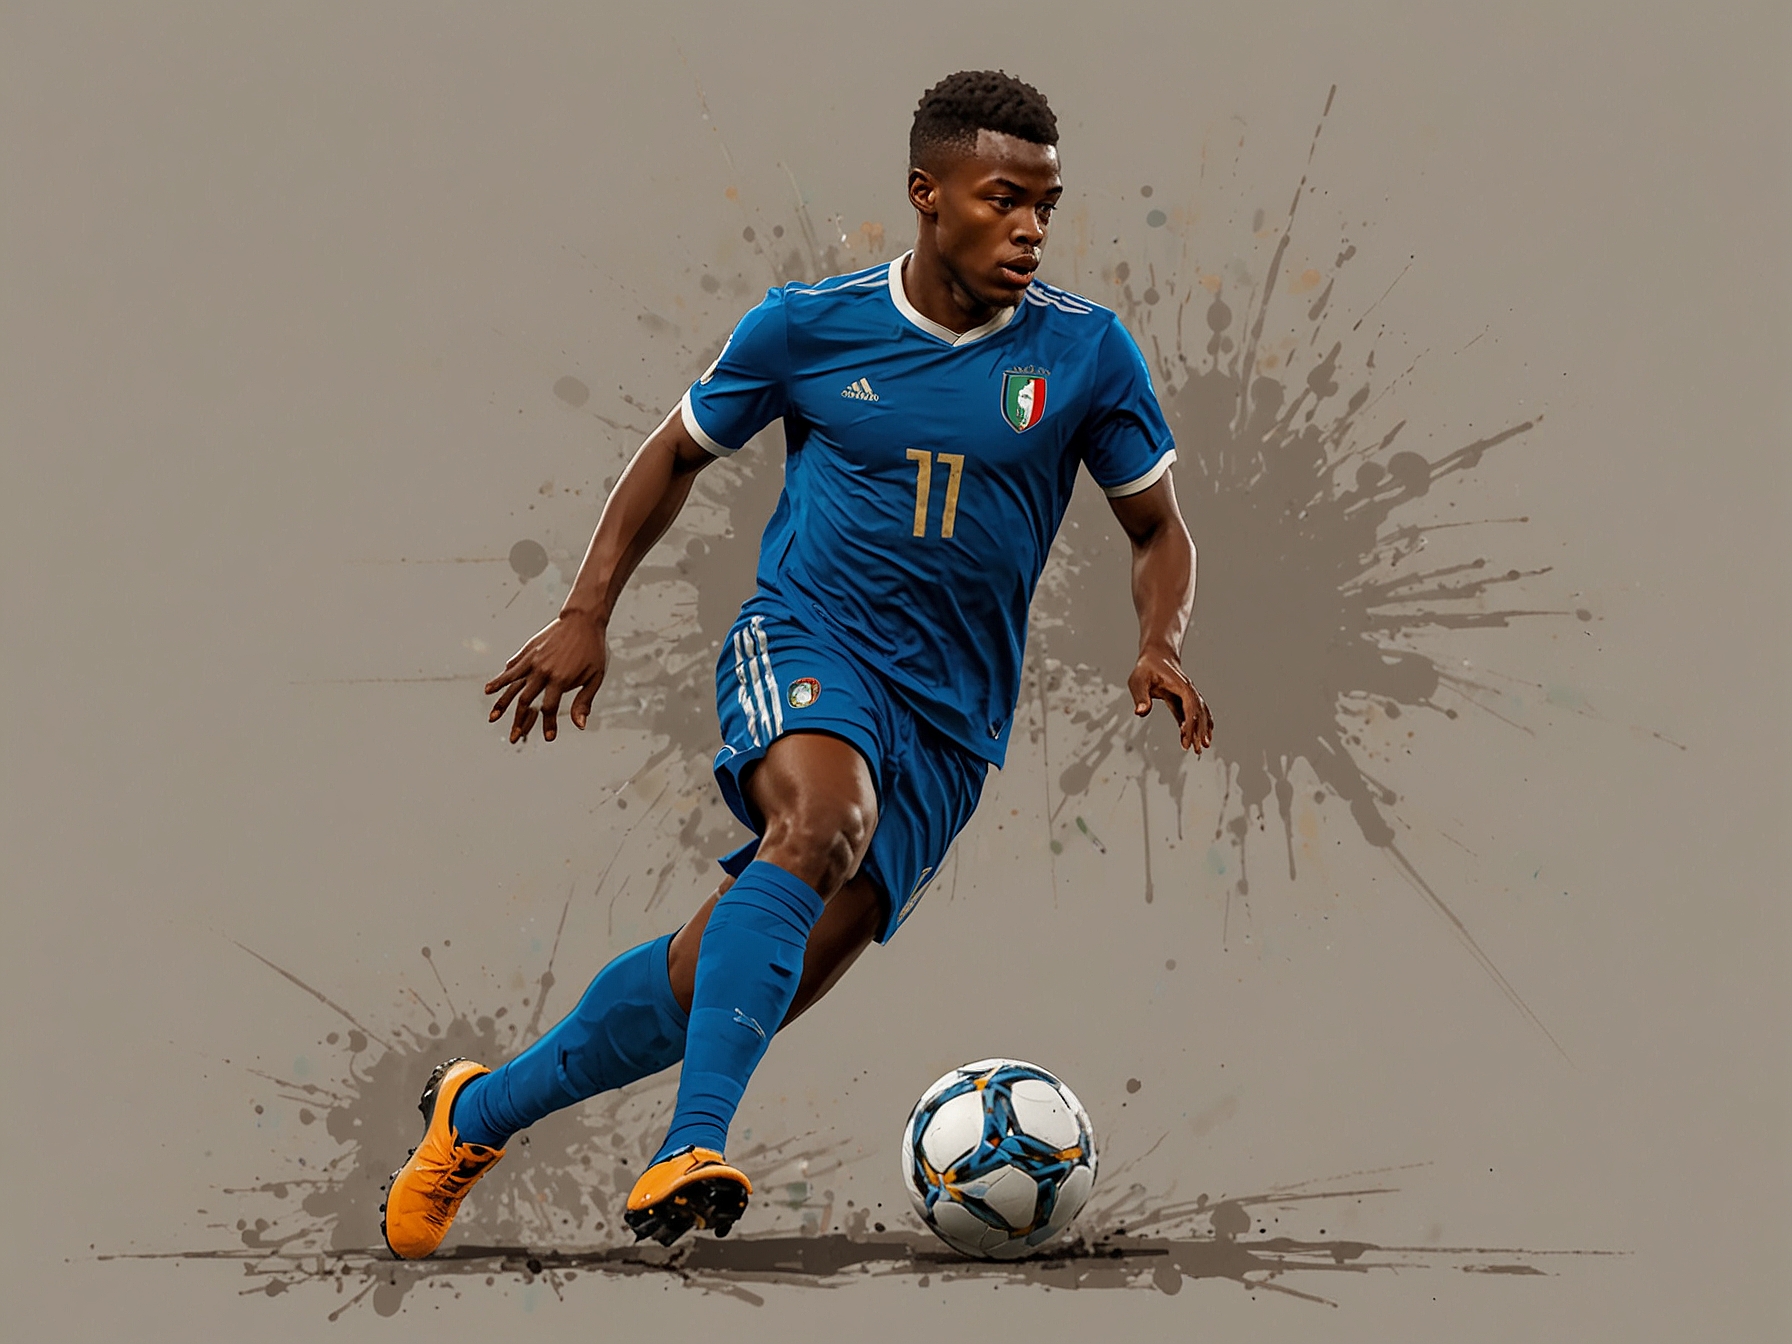 Teenage sensation Lamine Yamal in action, demonstrating his dribbling skills and tactical awareness that left the Italian defense struggling, signaling a bright future ahead.